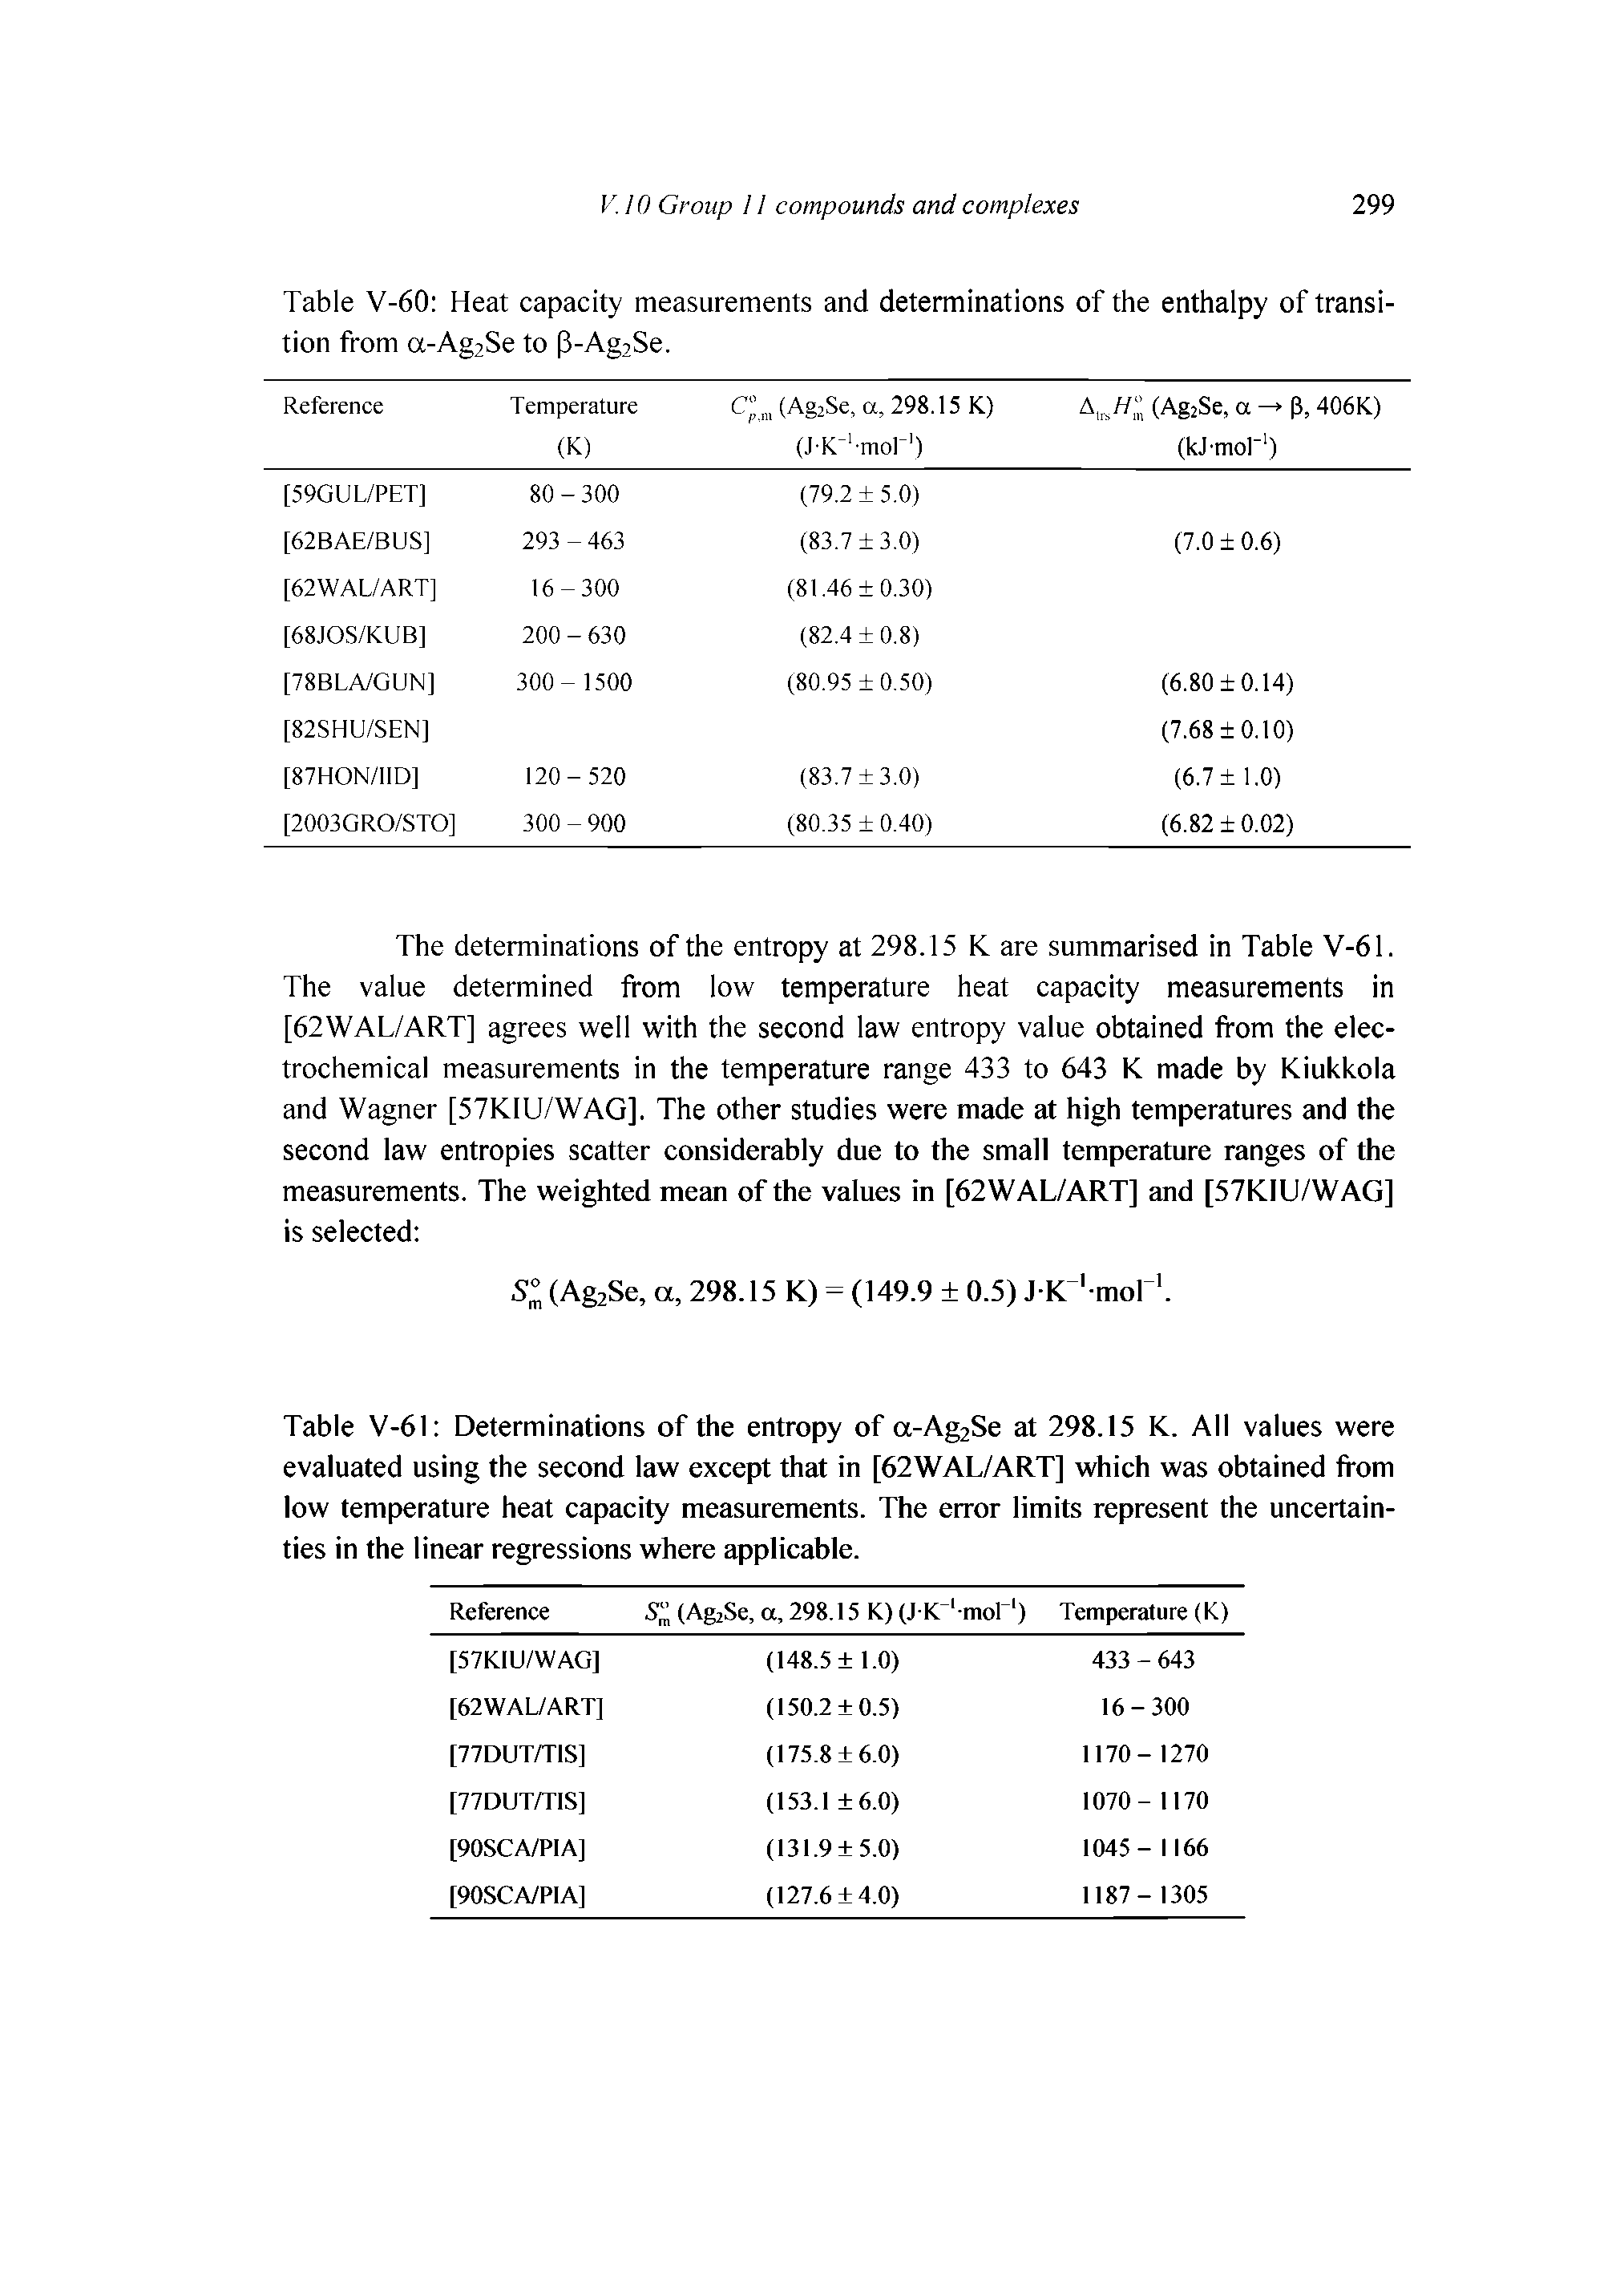 Table V-61 Determinations of the entropy of a-Ag2Se at 298.15 K. All values were evaluated using the second law except that in [62WAL/ART] which was obtained from low temperature heat capacity measurements. The error limits represent the uncertainties in the linear regressions where applicable.